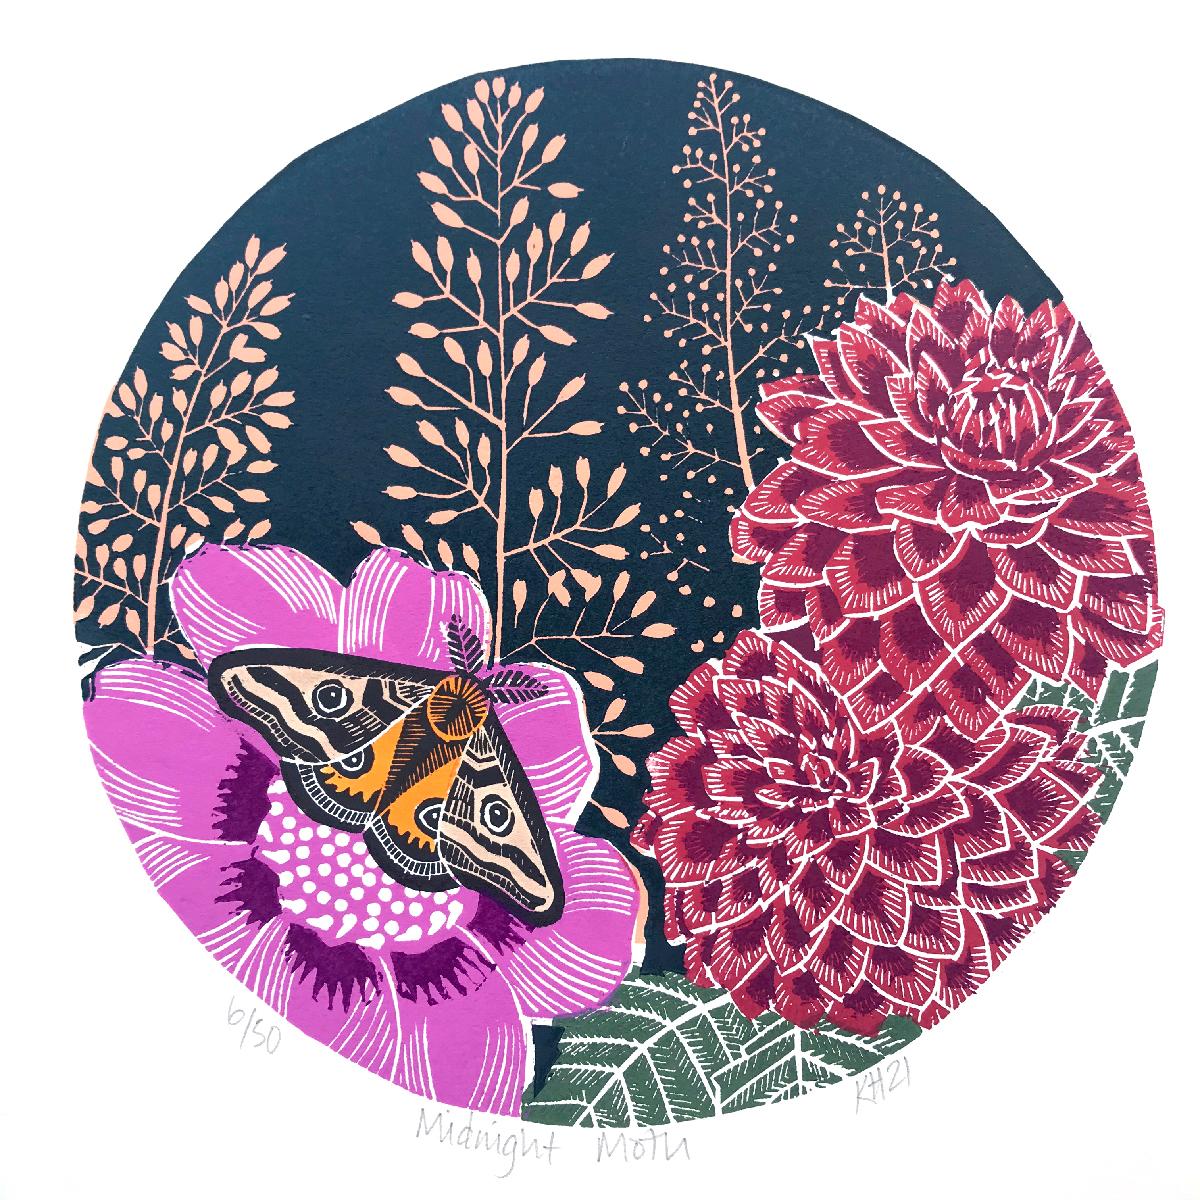 Midnight Moth and Midnight Garden - Gray Print by Kate Heiss